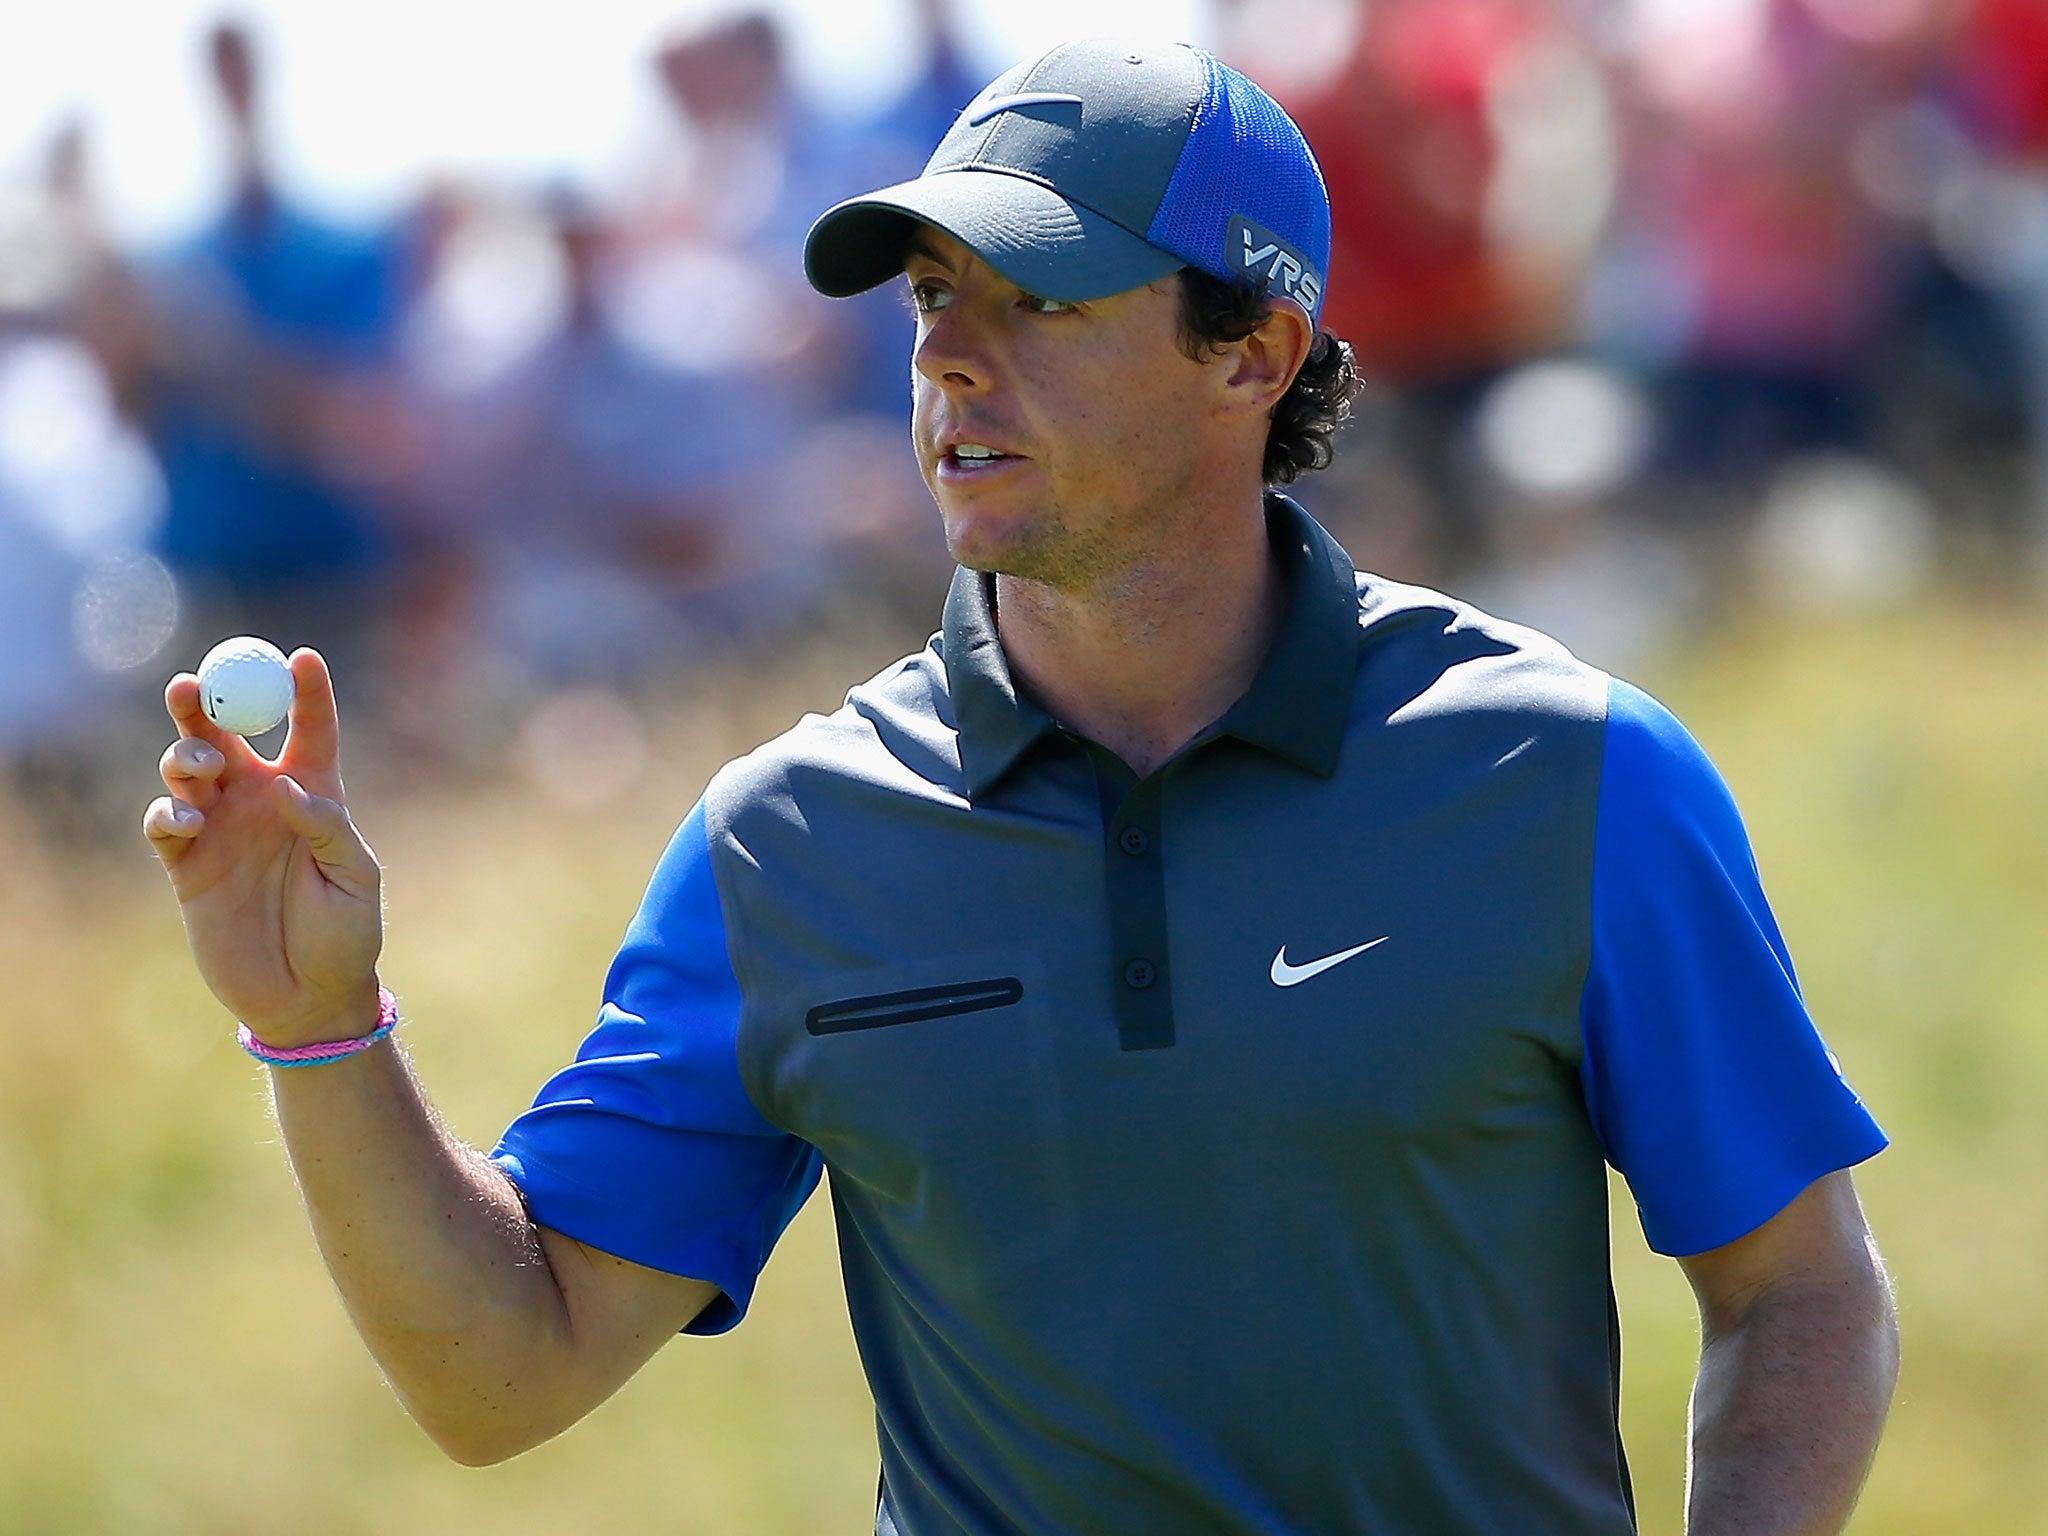 Rory McIlroy of Northern Ireland waves to the gallery during the first round of The 143rd Open Championship at Royal Liverpool on July 17, 2014 in Hoylake, England.